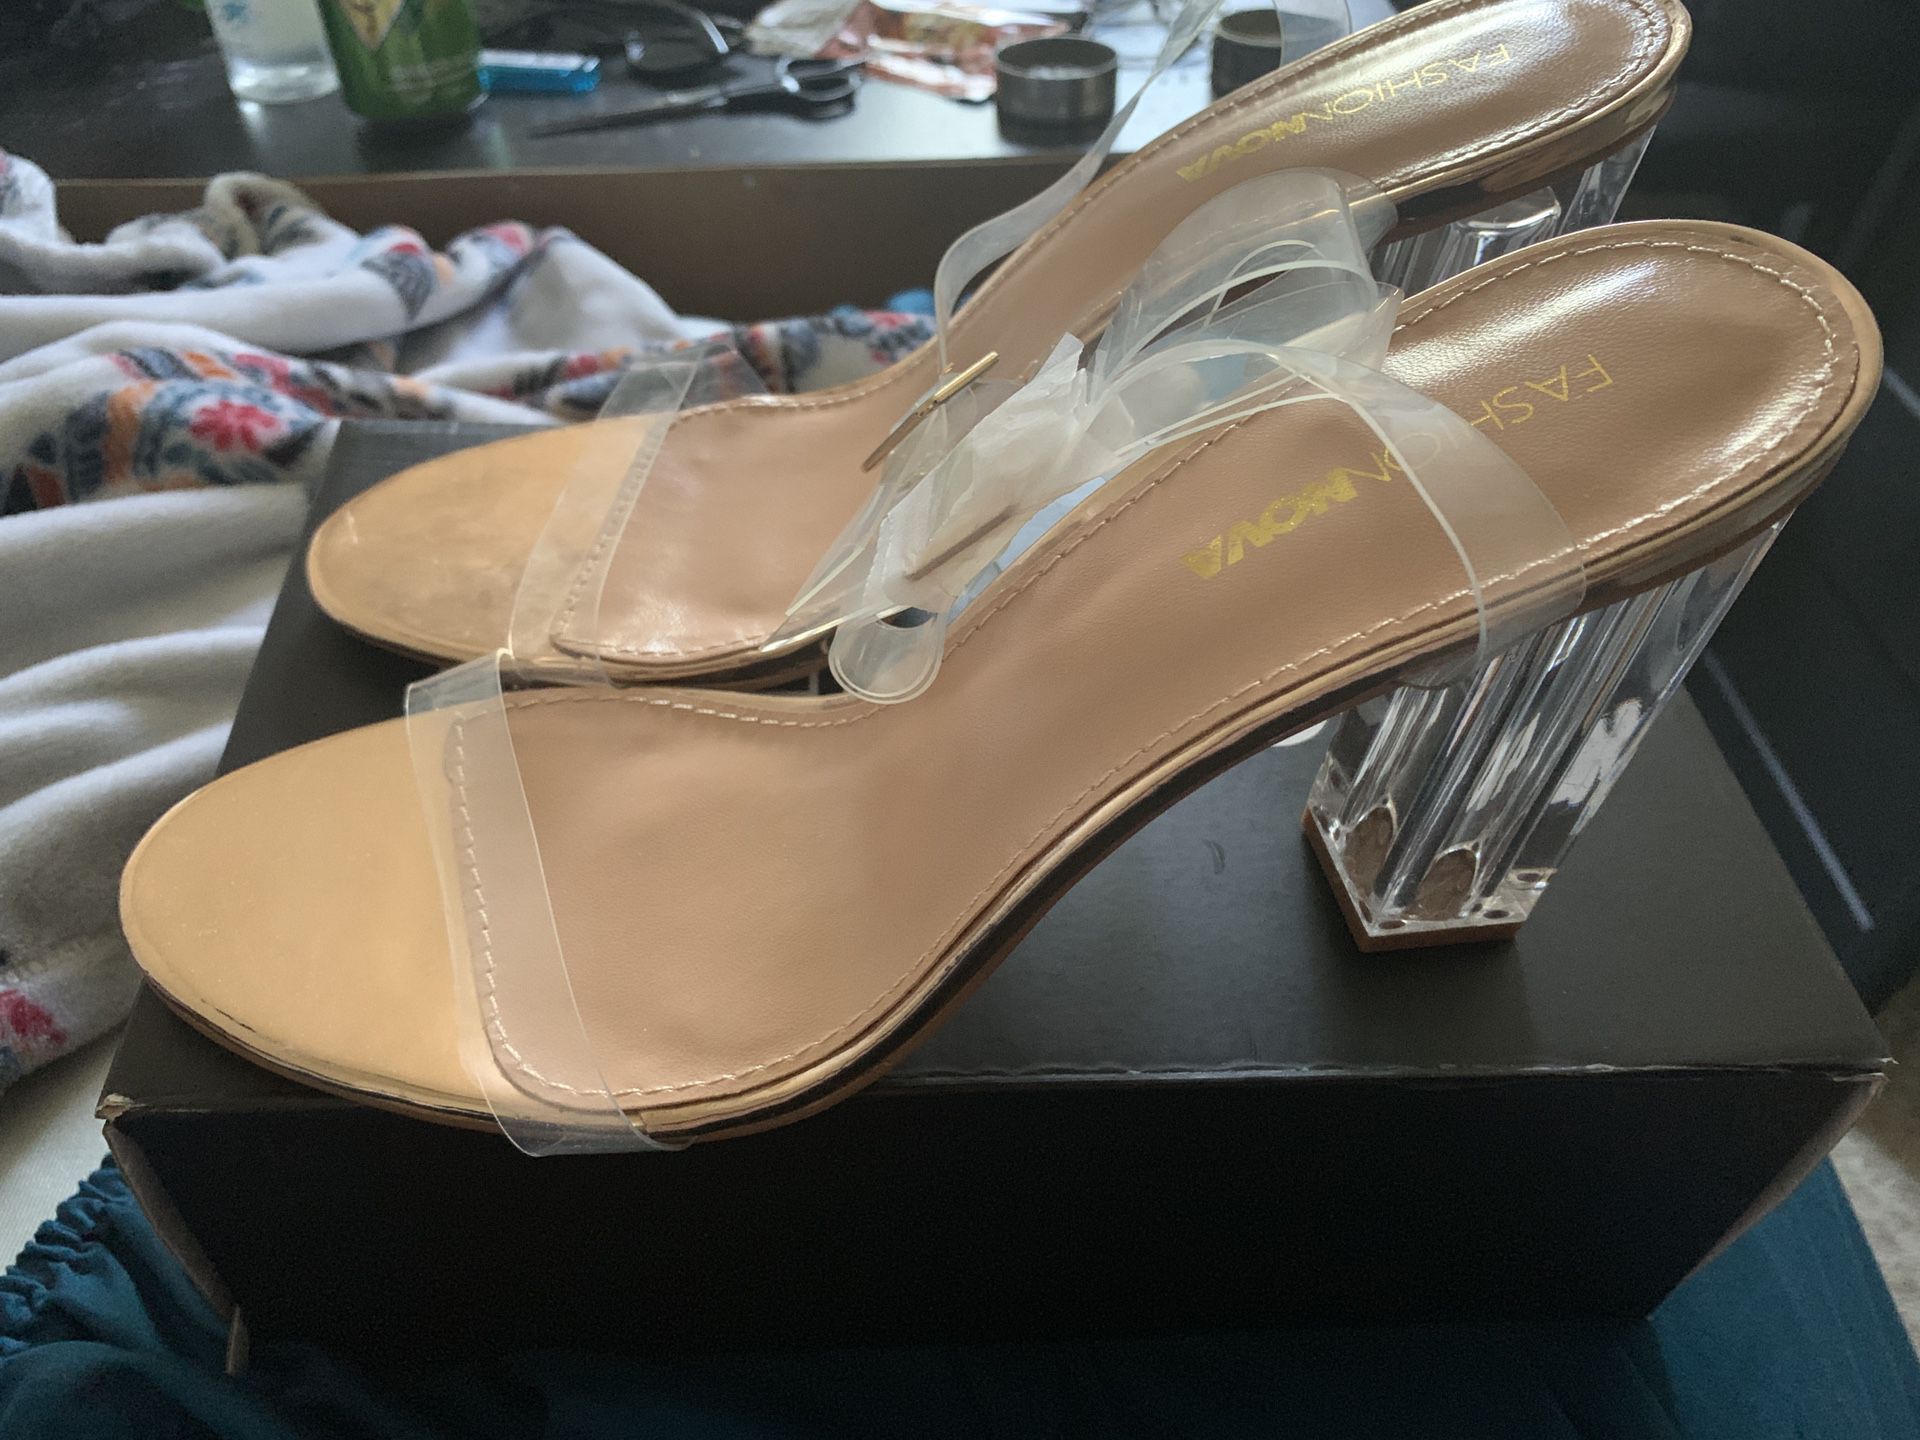 FashionNova Heels Rose Gld/ Clear Sz 11, MAKE ME AN OFFER, pick up today, IM MOVING!